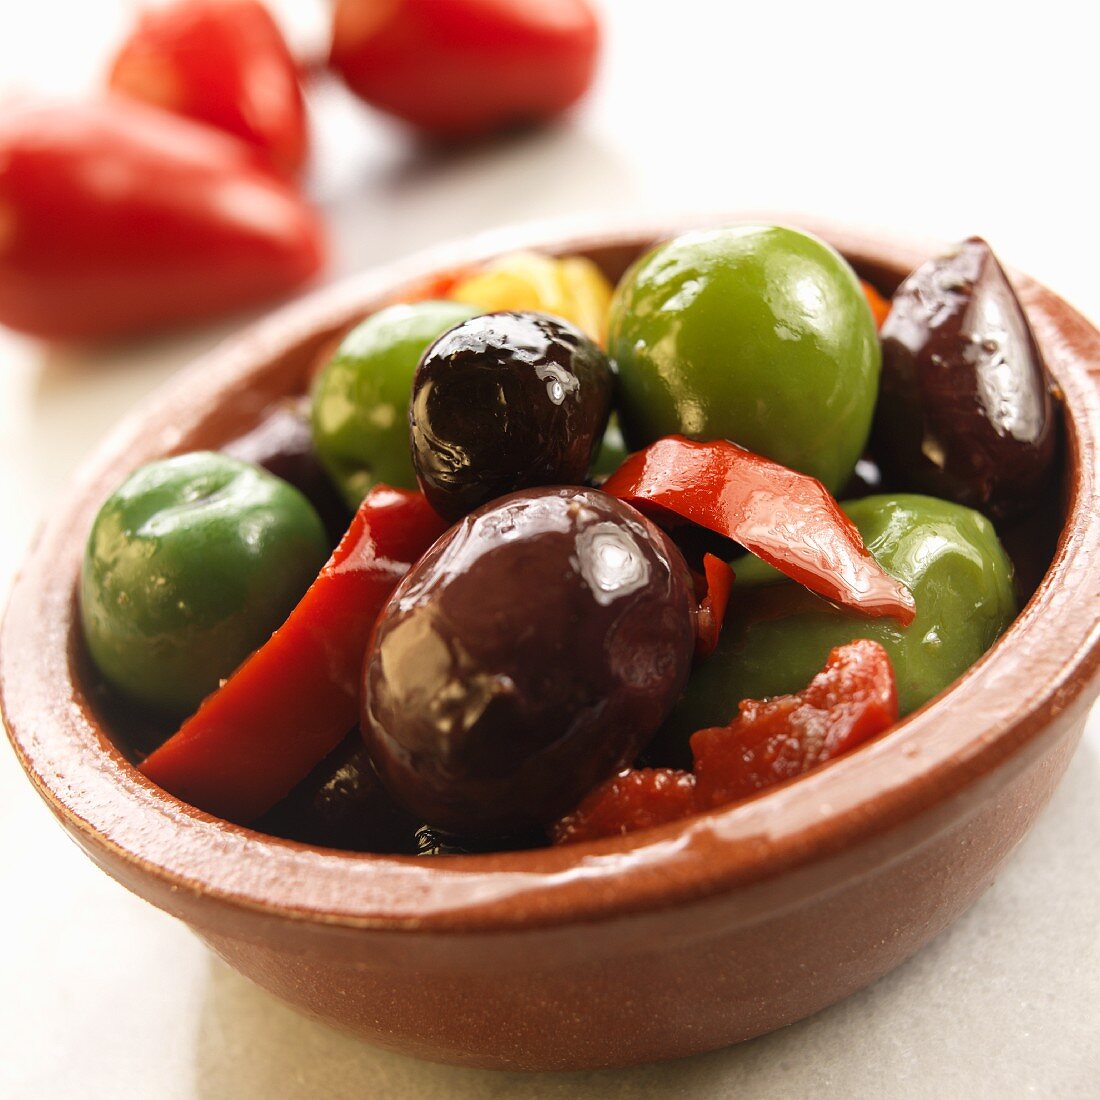 Marinated olives and peppers in a terracotta dish